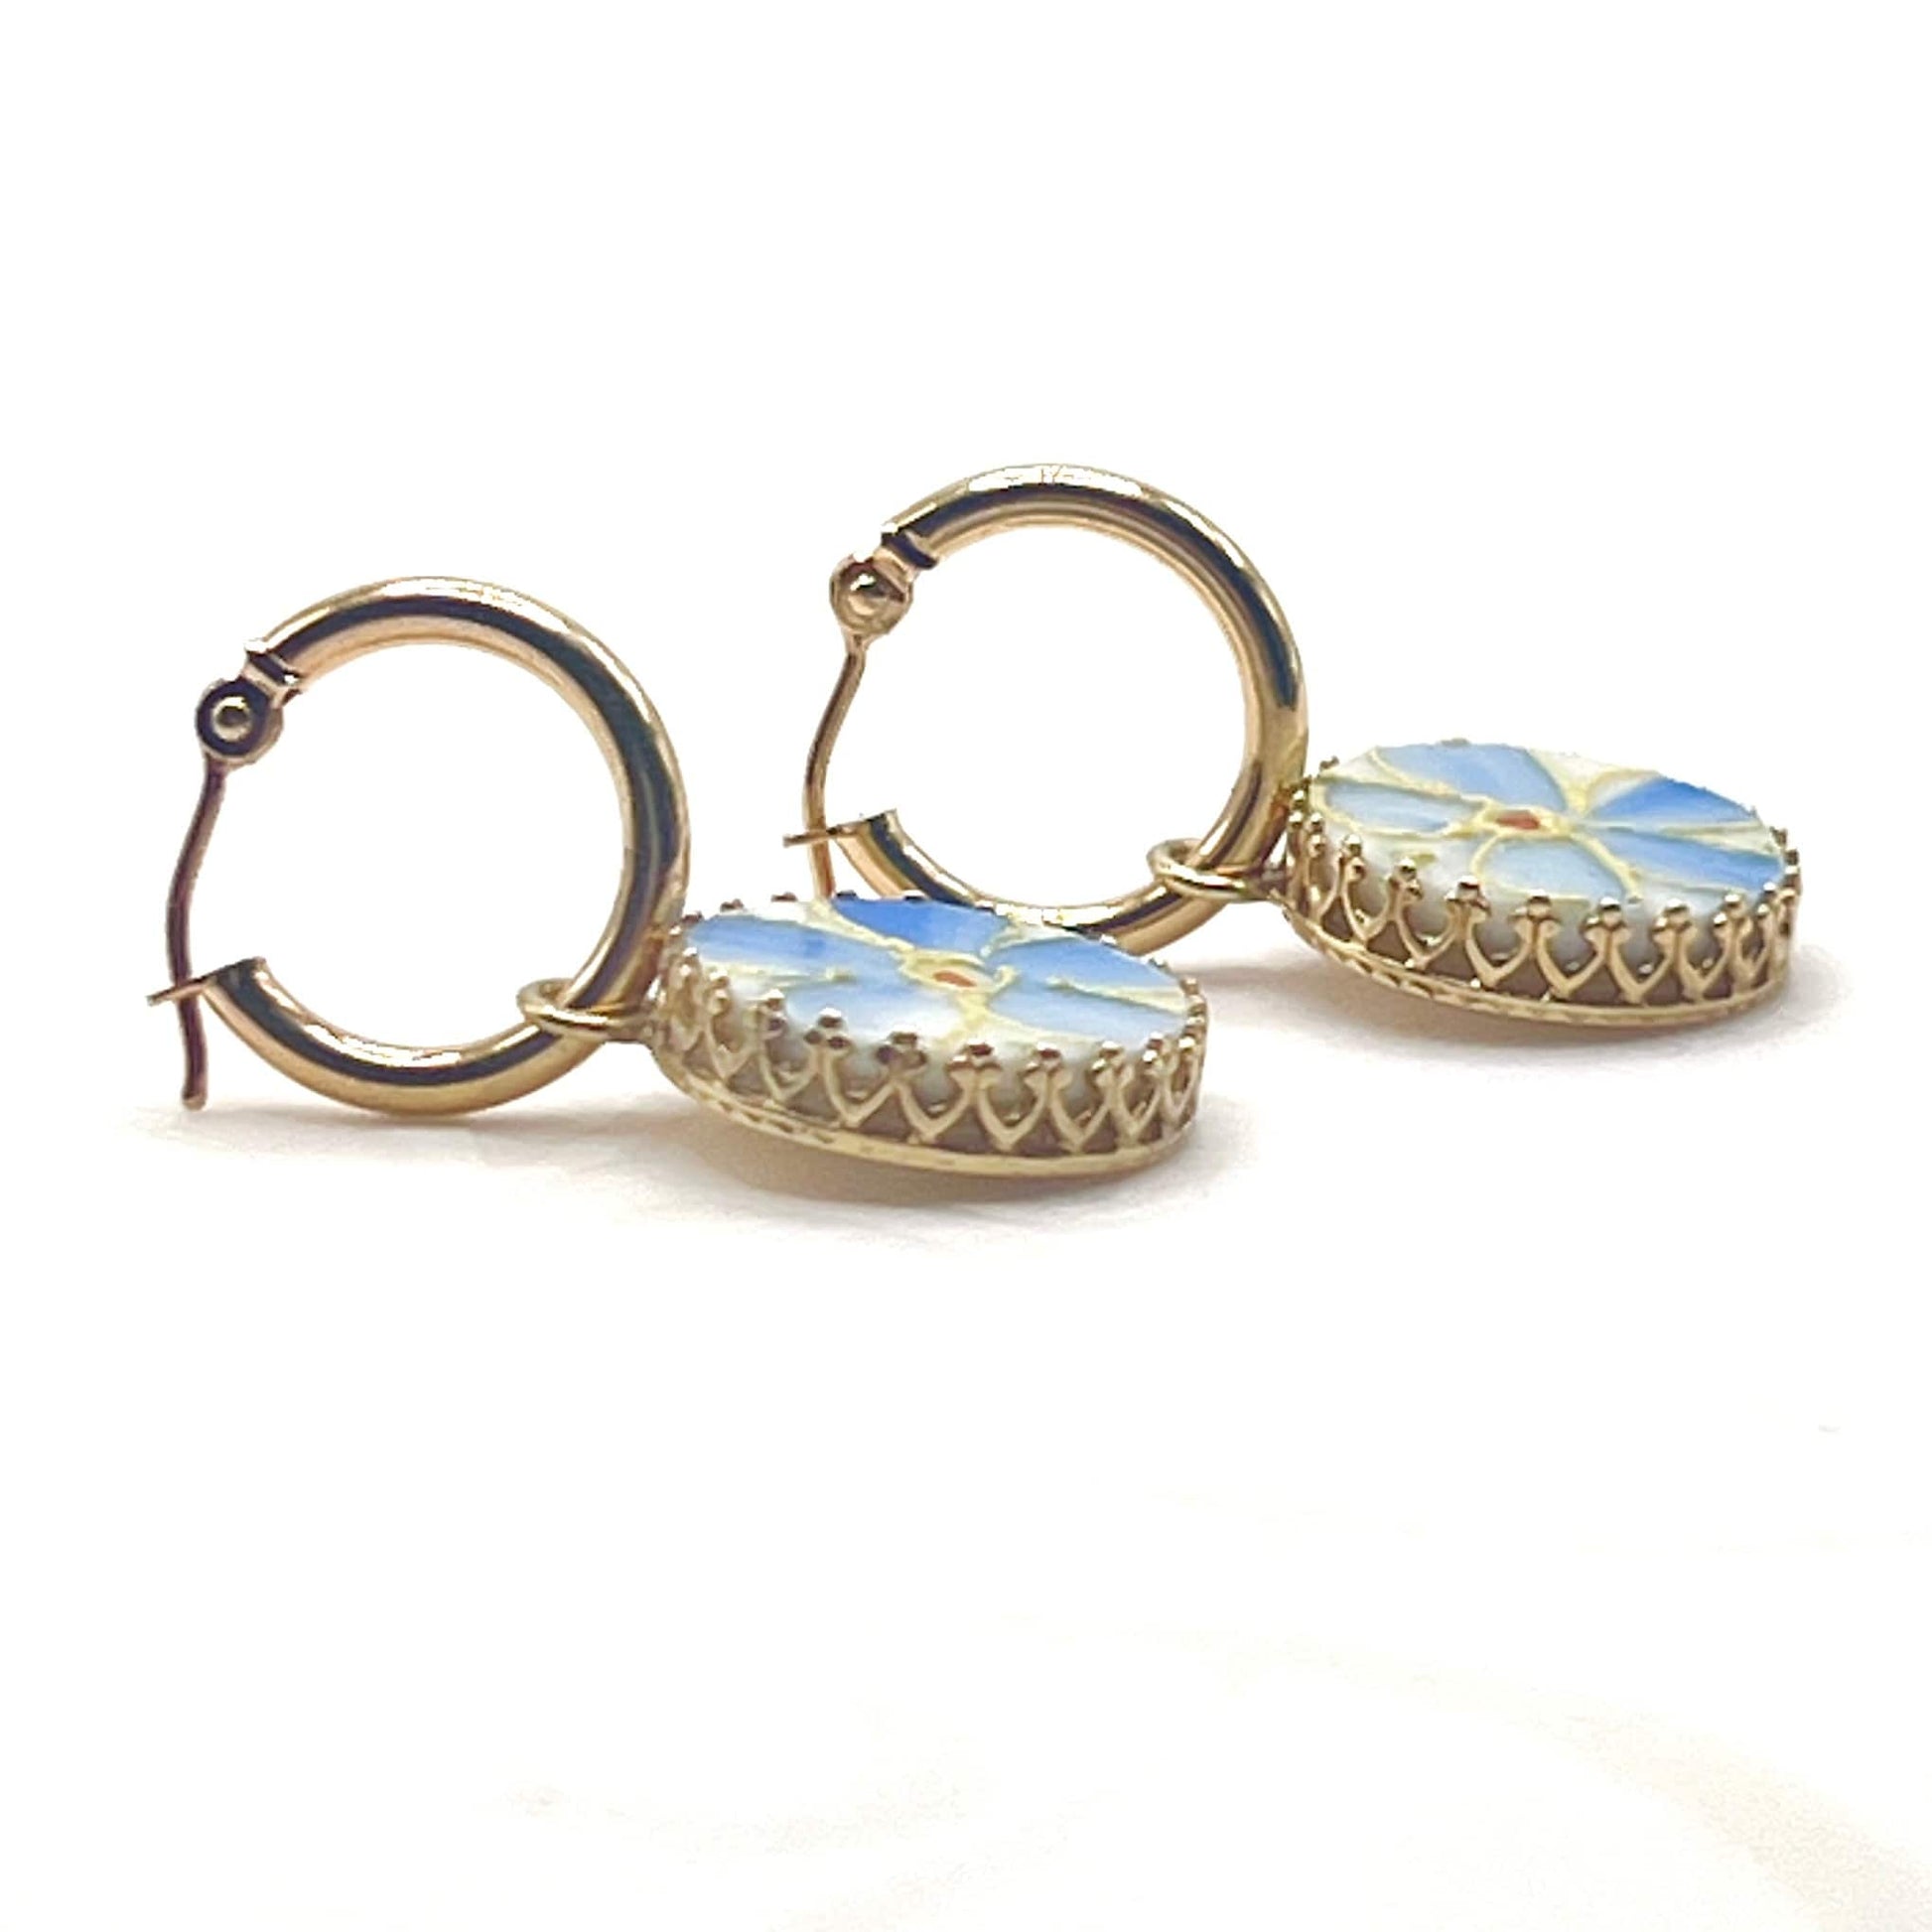 14k Gold Hoop Earrings, Antique Forget Me Not Porcelain, Broken China Jewelry, 18th and 20th Anniversary Gifts, Hand Painted China Jewelry